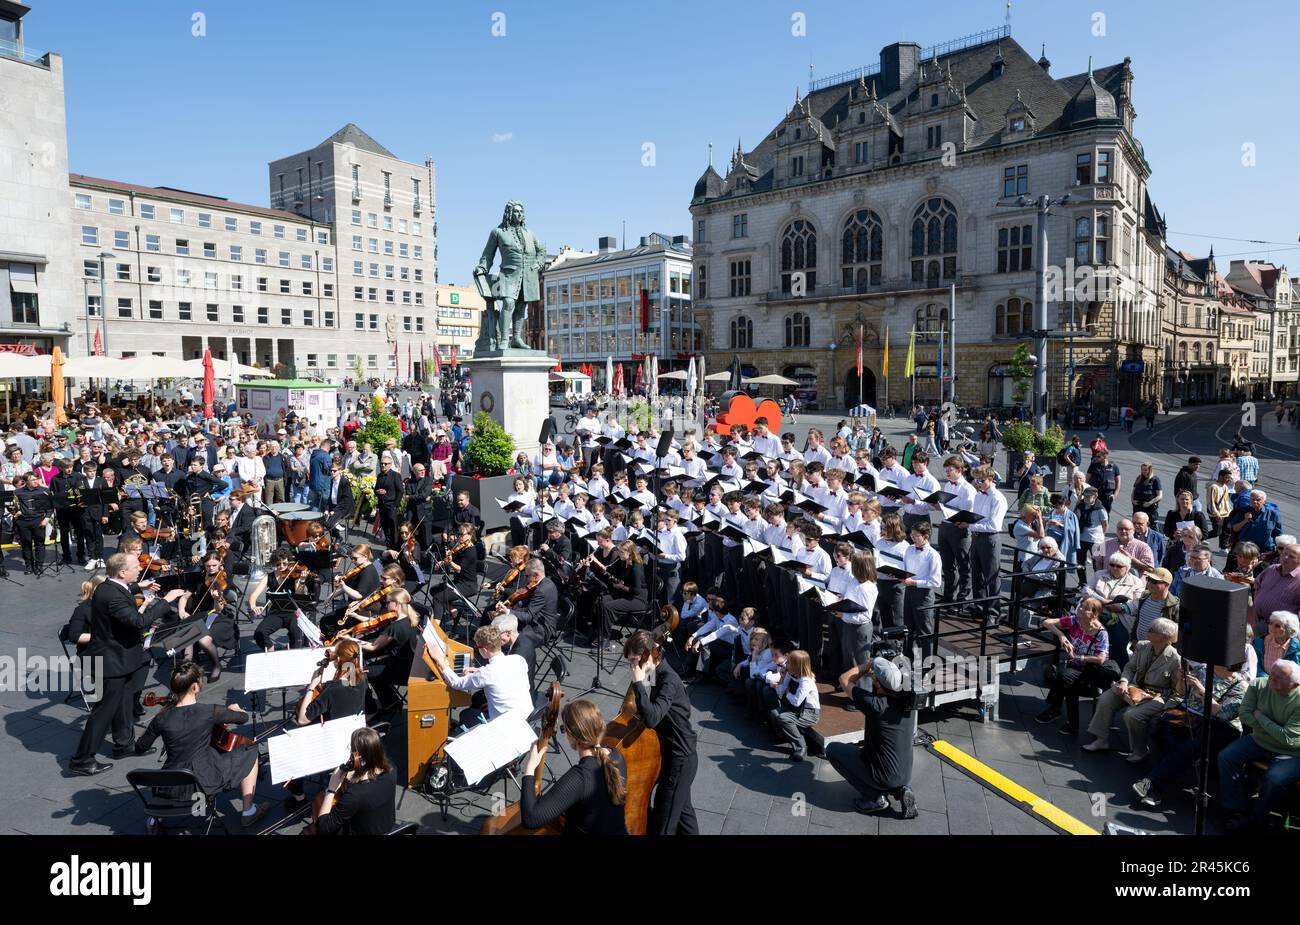 26 May 2023, Saxony-Anhalt, Halle (Saale): The boys of the Halle City Singing Choir under the direction of Clemens Flämig (l), the brass ensemble Latina Brass, and the Academic Orchestra of Martin Luther University will perform at the Handel Monument in Halle/Saale at the opening ceremony of the Handel Festival 2023. With around 70 events at 17 venues, the Handel Festival will begin in the afternoon with a ceremony at the Handel Monument on the city's market square. Until June 11, the birthplace of George Frideric Handel (1685-1759) will be dominated by baroque music with many concerts and als Stock Photo